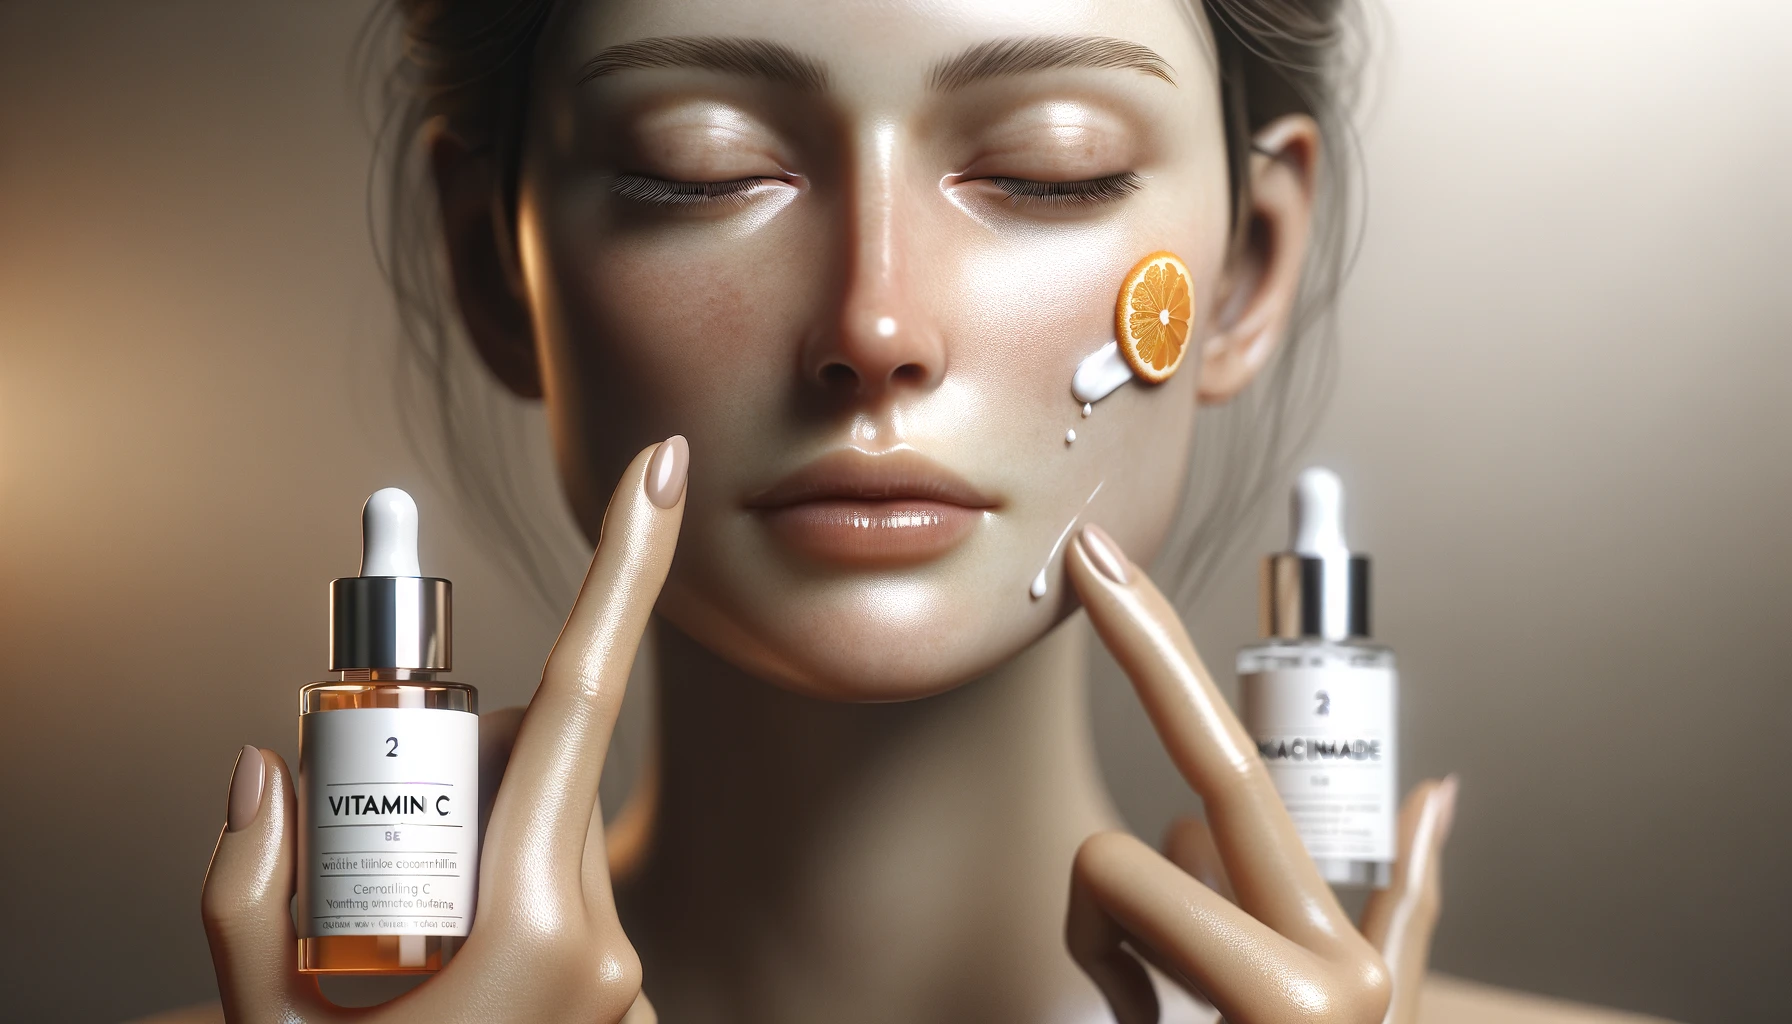 Can You use Vitamin C and Niacinamide together?